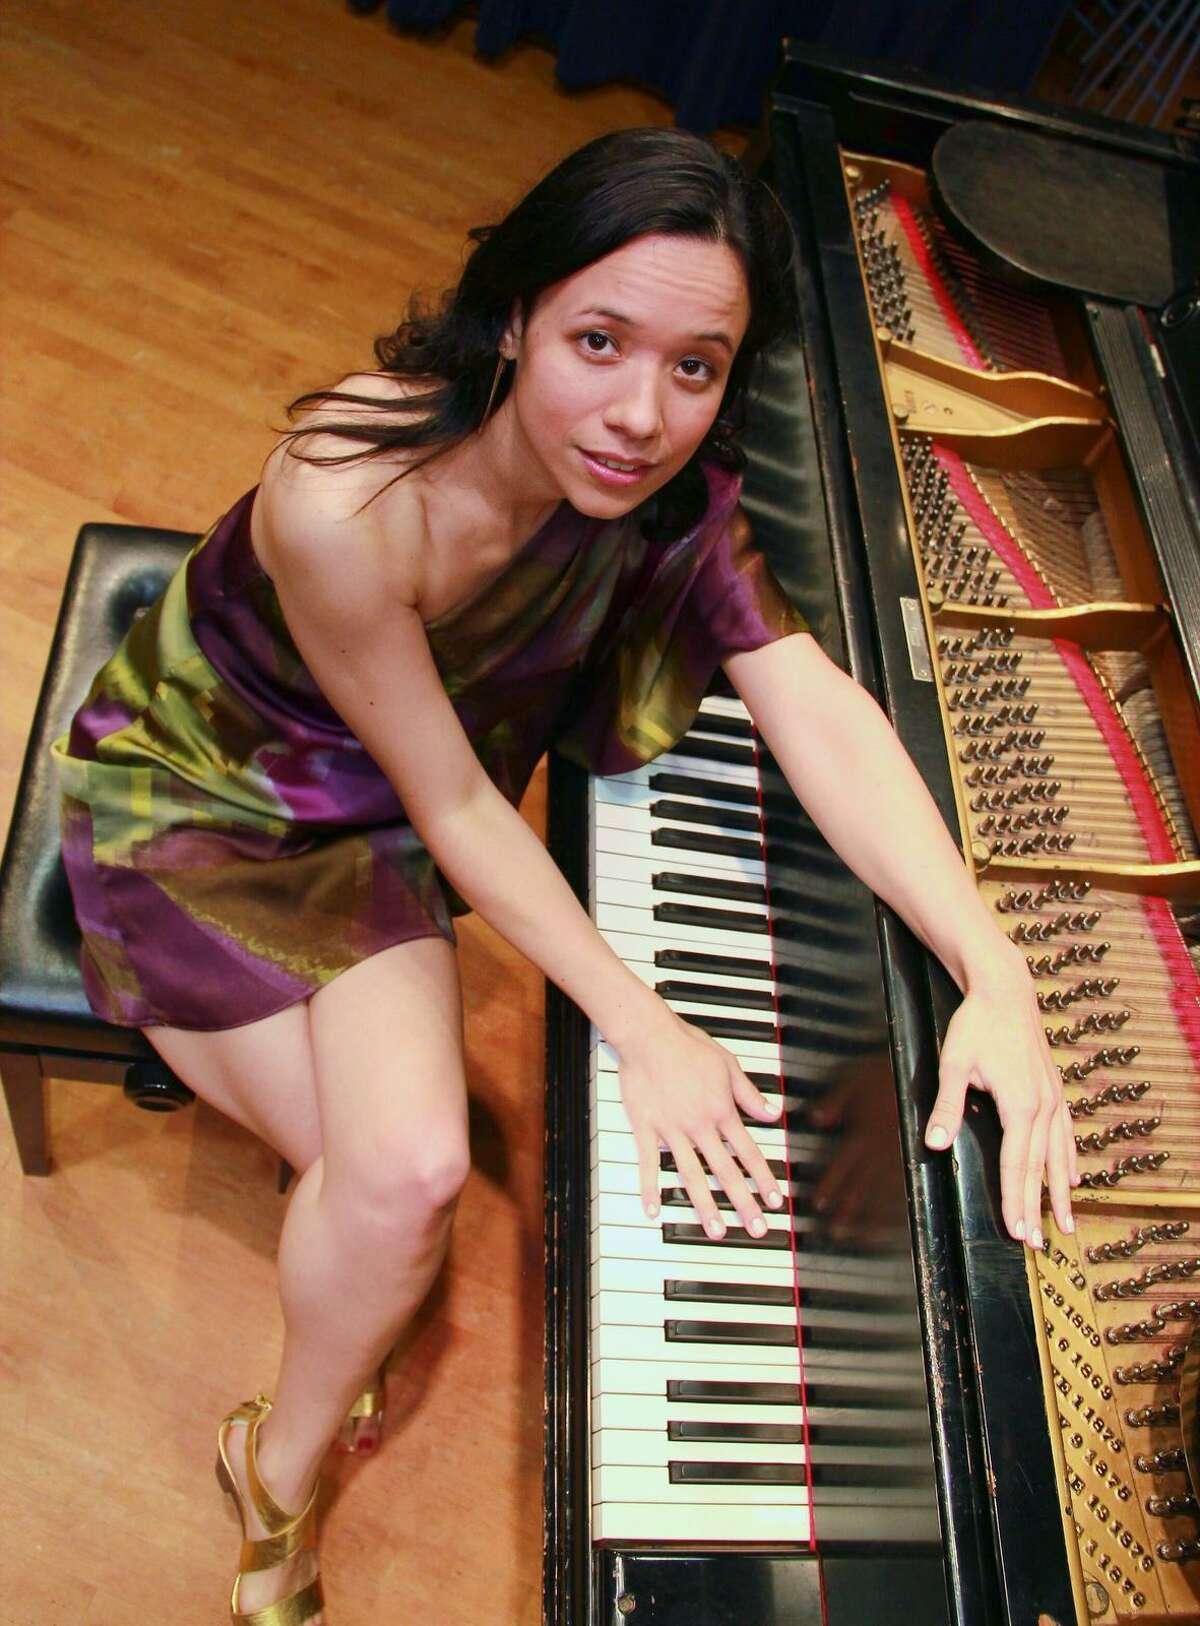 Isabella Mendes brings her eclectic mix of American jazz standards, authentic bossa nova and Brazilian jazz to the Milford Center for the Arts on Jan. 21.